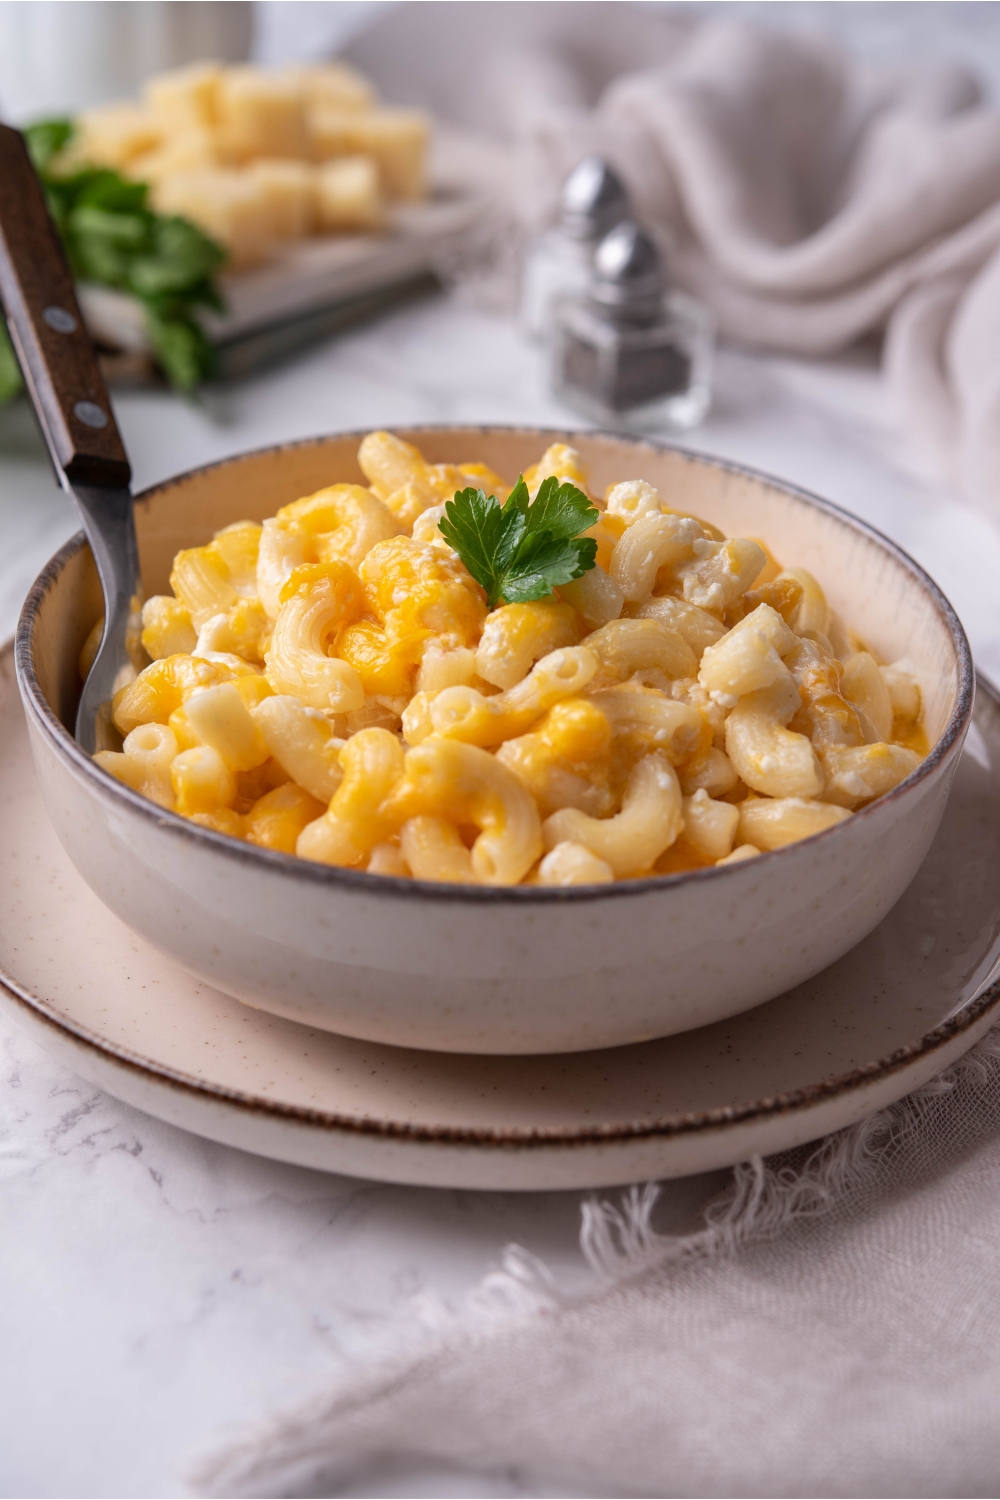 Old-fashioned macaroni and cheese in a white bowl with a fork and a garnish of fresh parsley in the bowl. The bowl is atop a white plate.